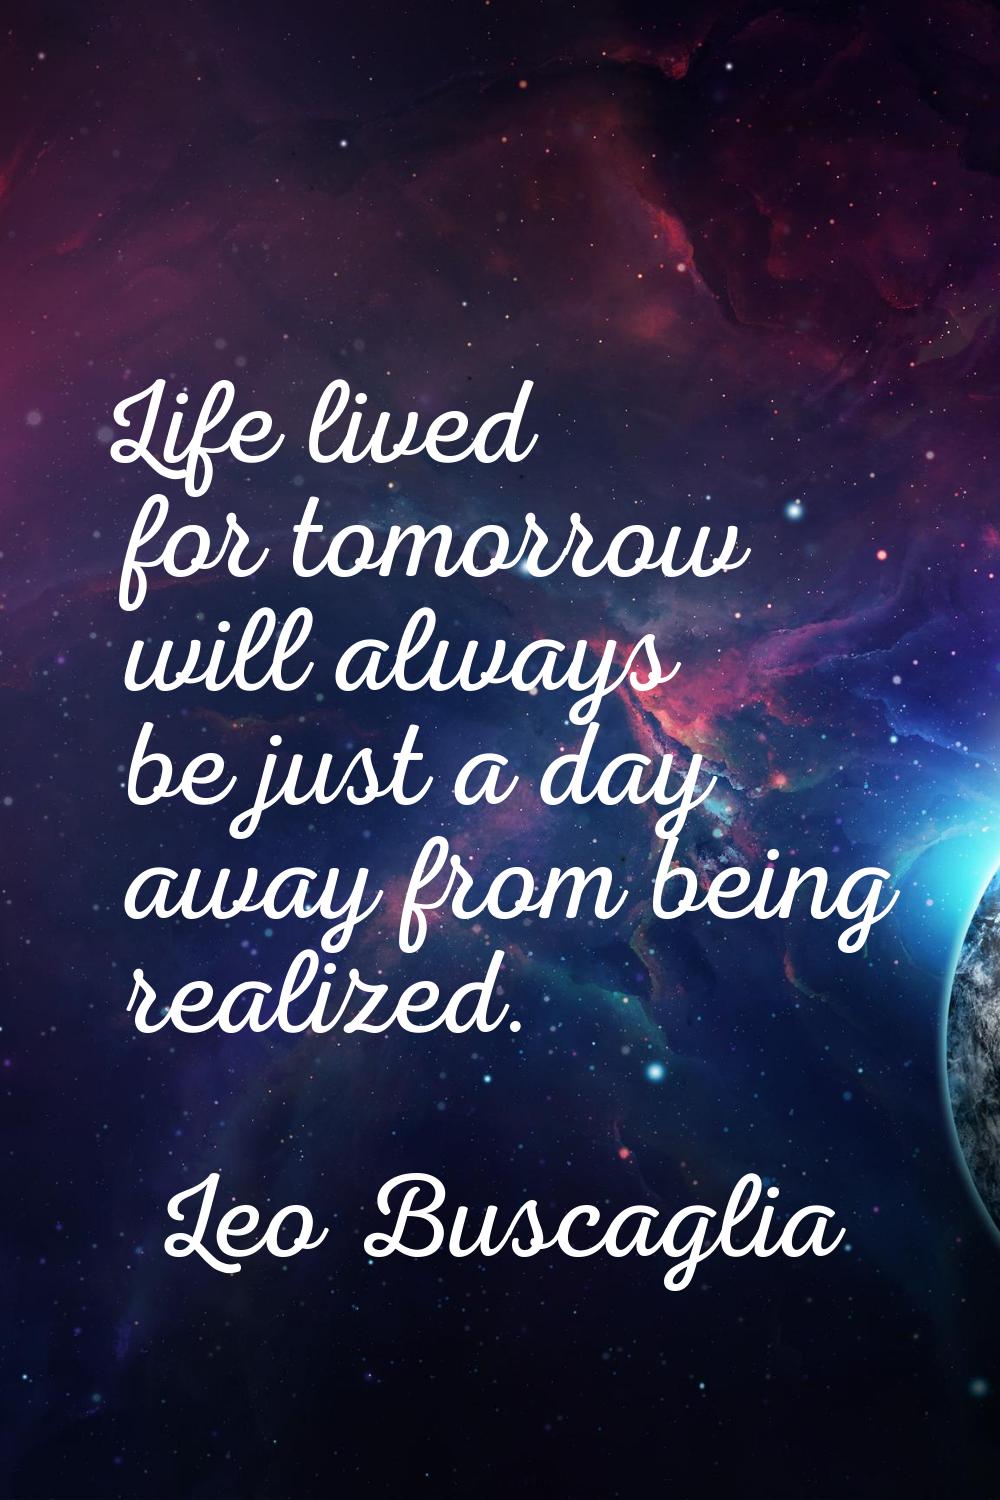 Life lived for tomorrow will always be just a day away from being realized.